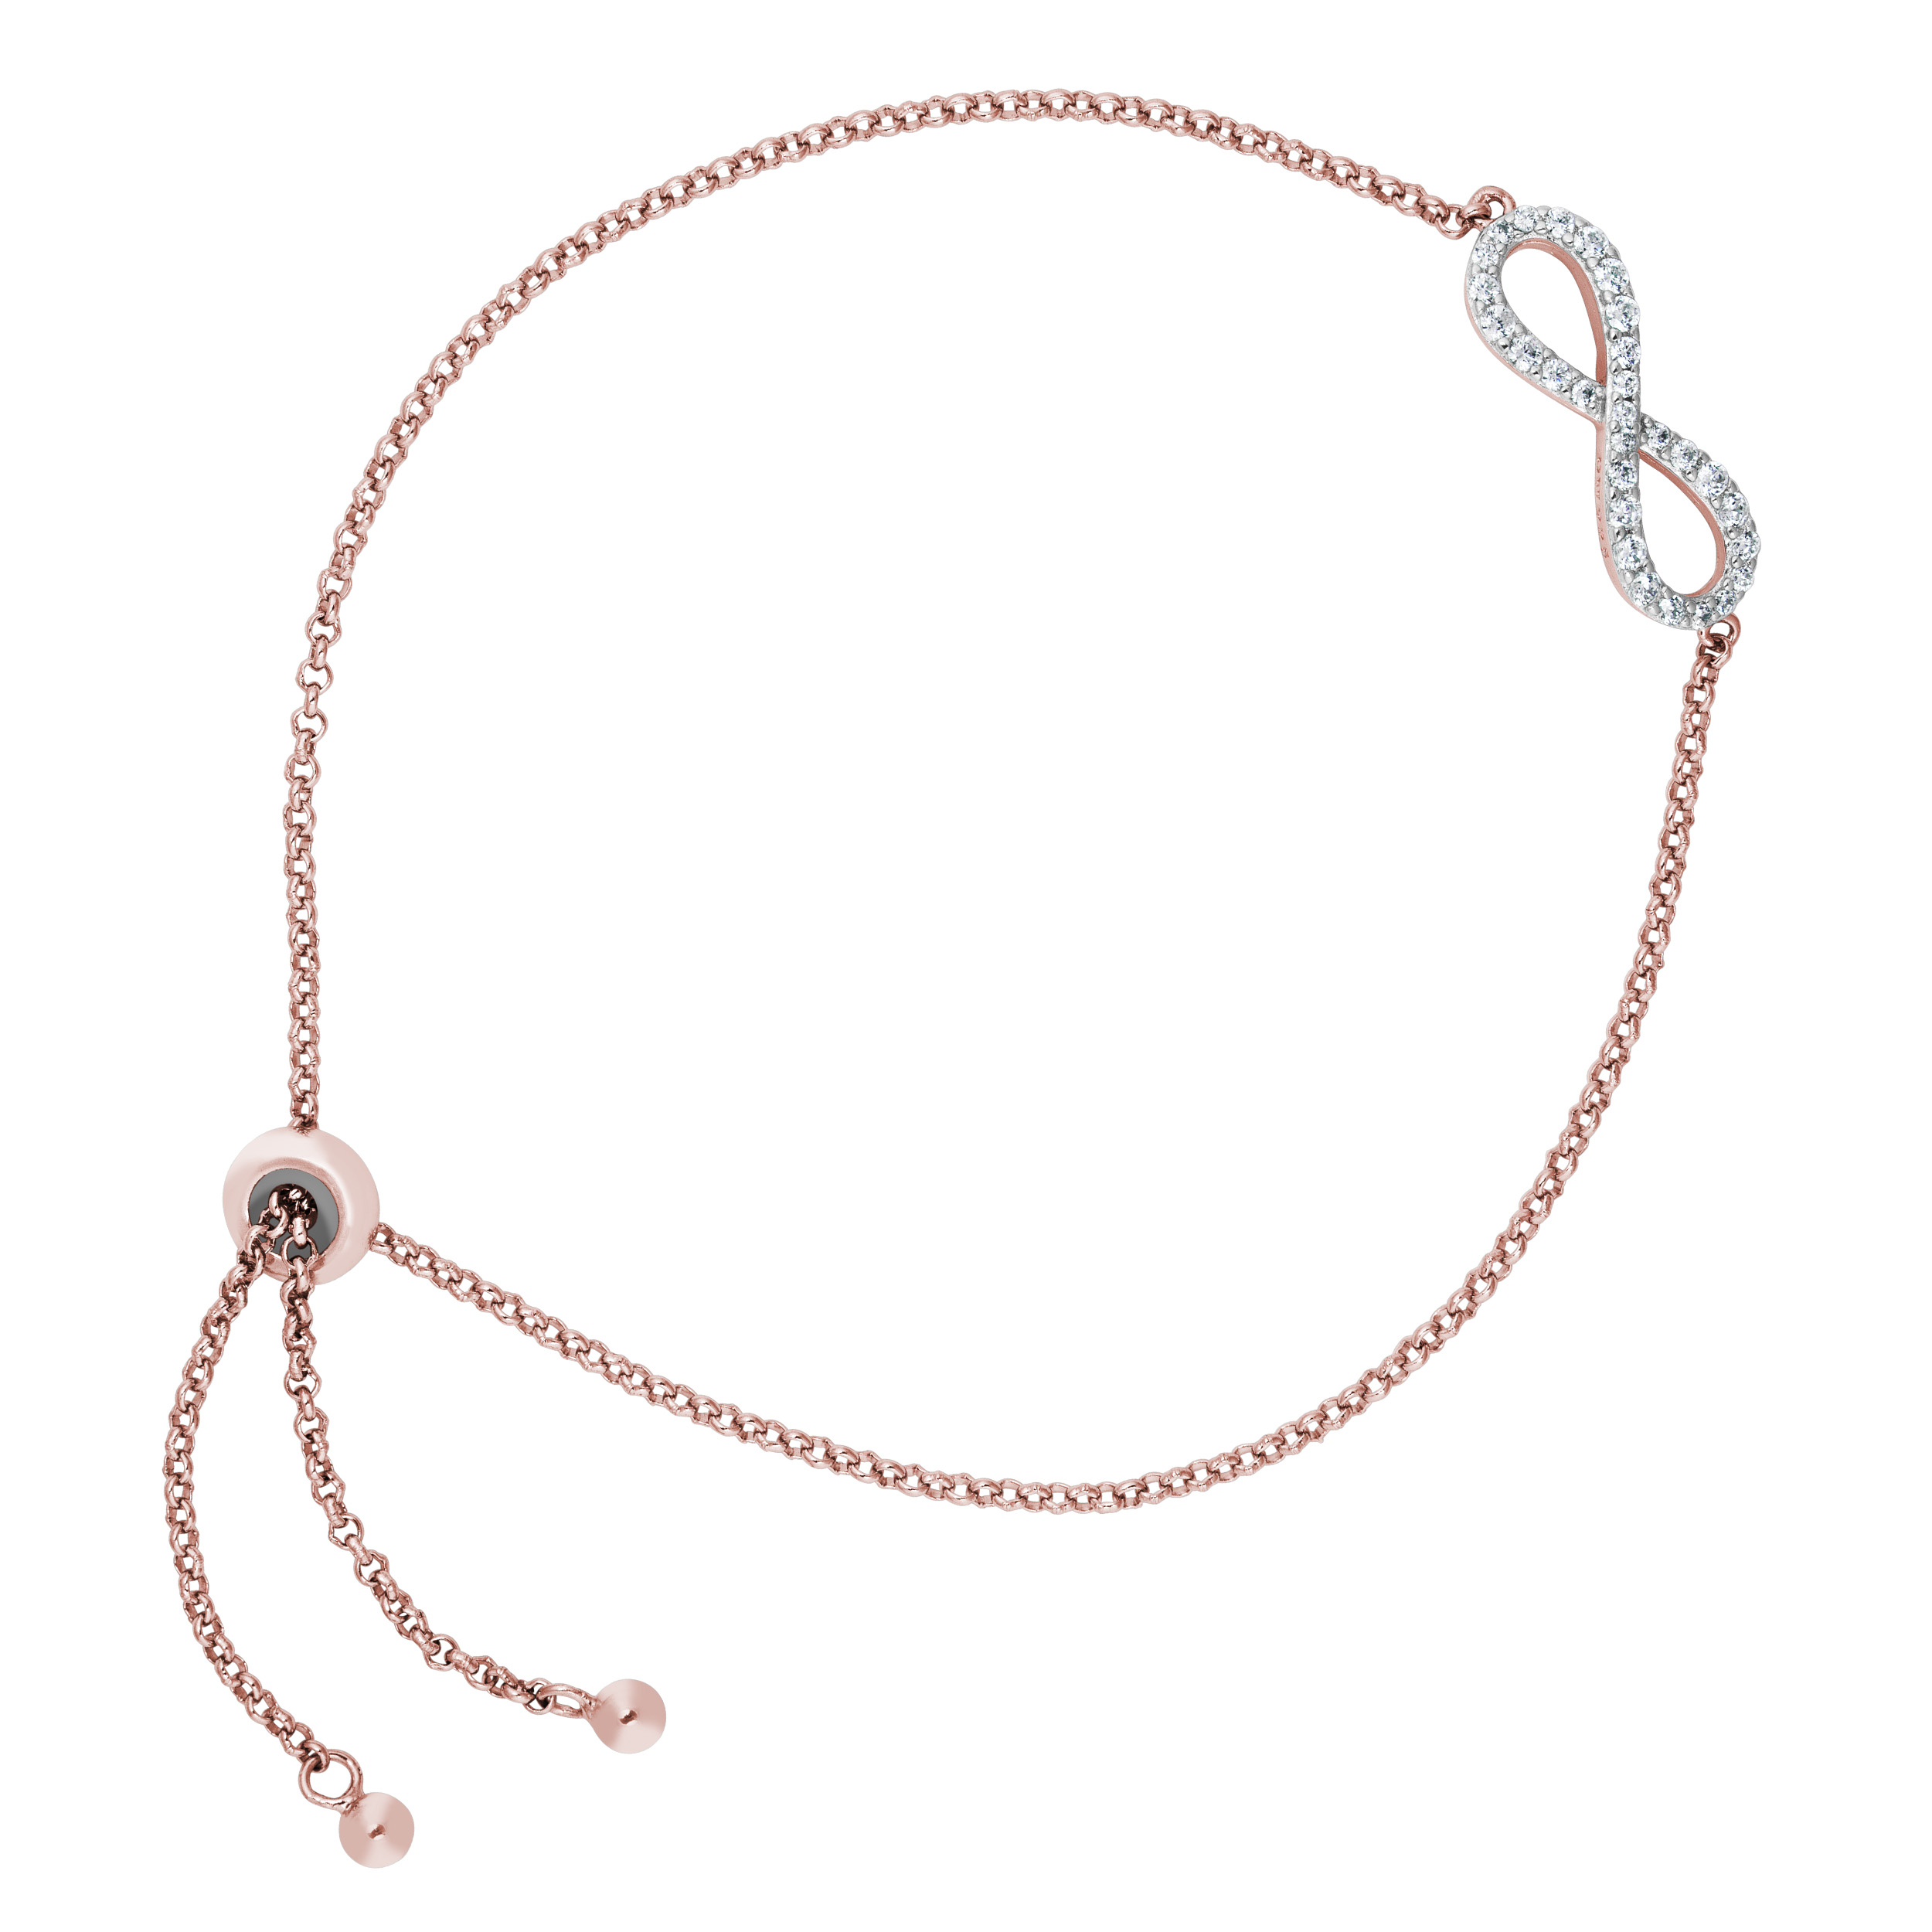 Pink Infinity Bolo Bracelet, Rose Gold Plated, Rhodium Plated Sterling Silver